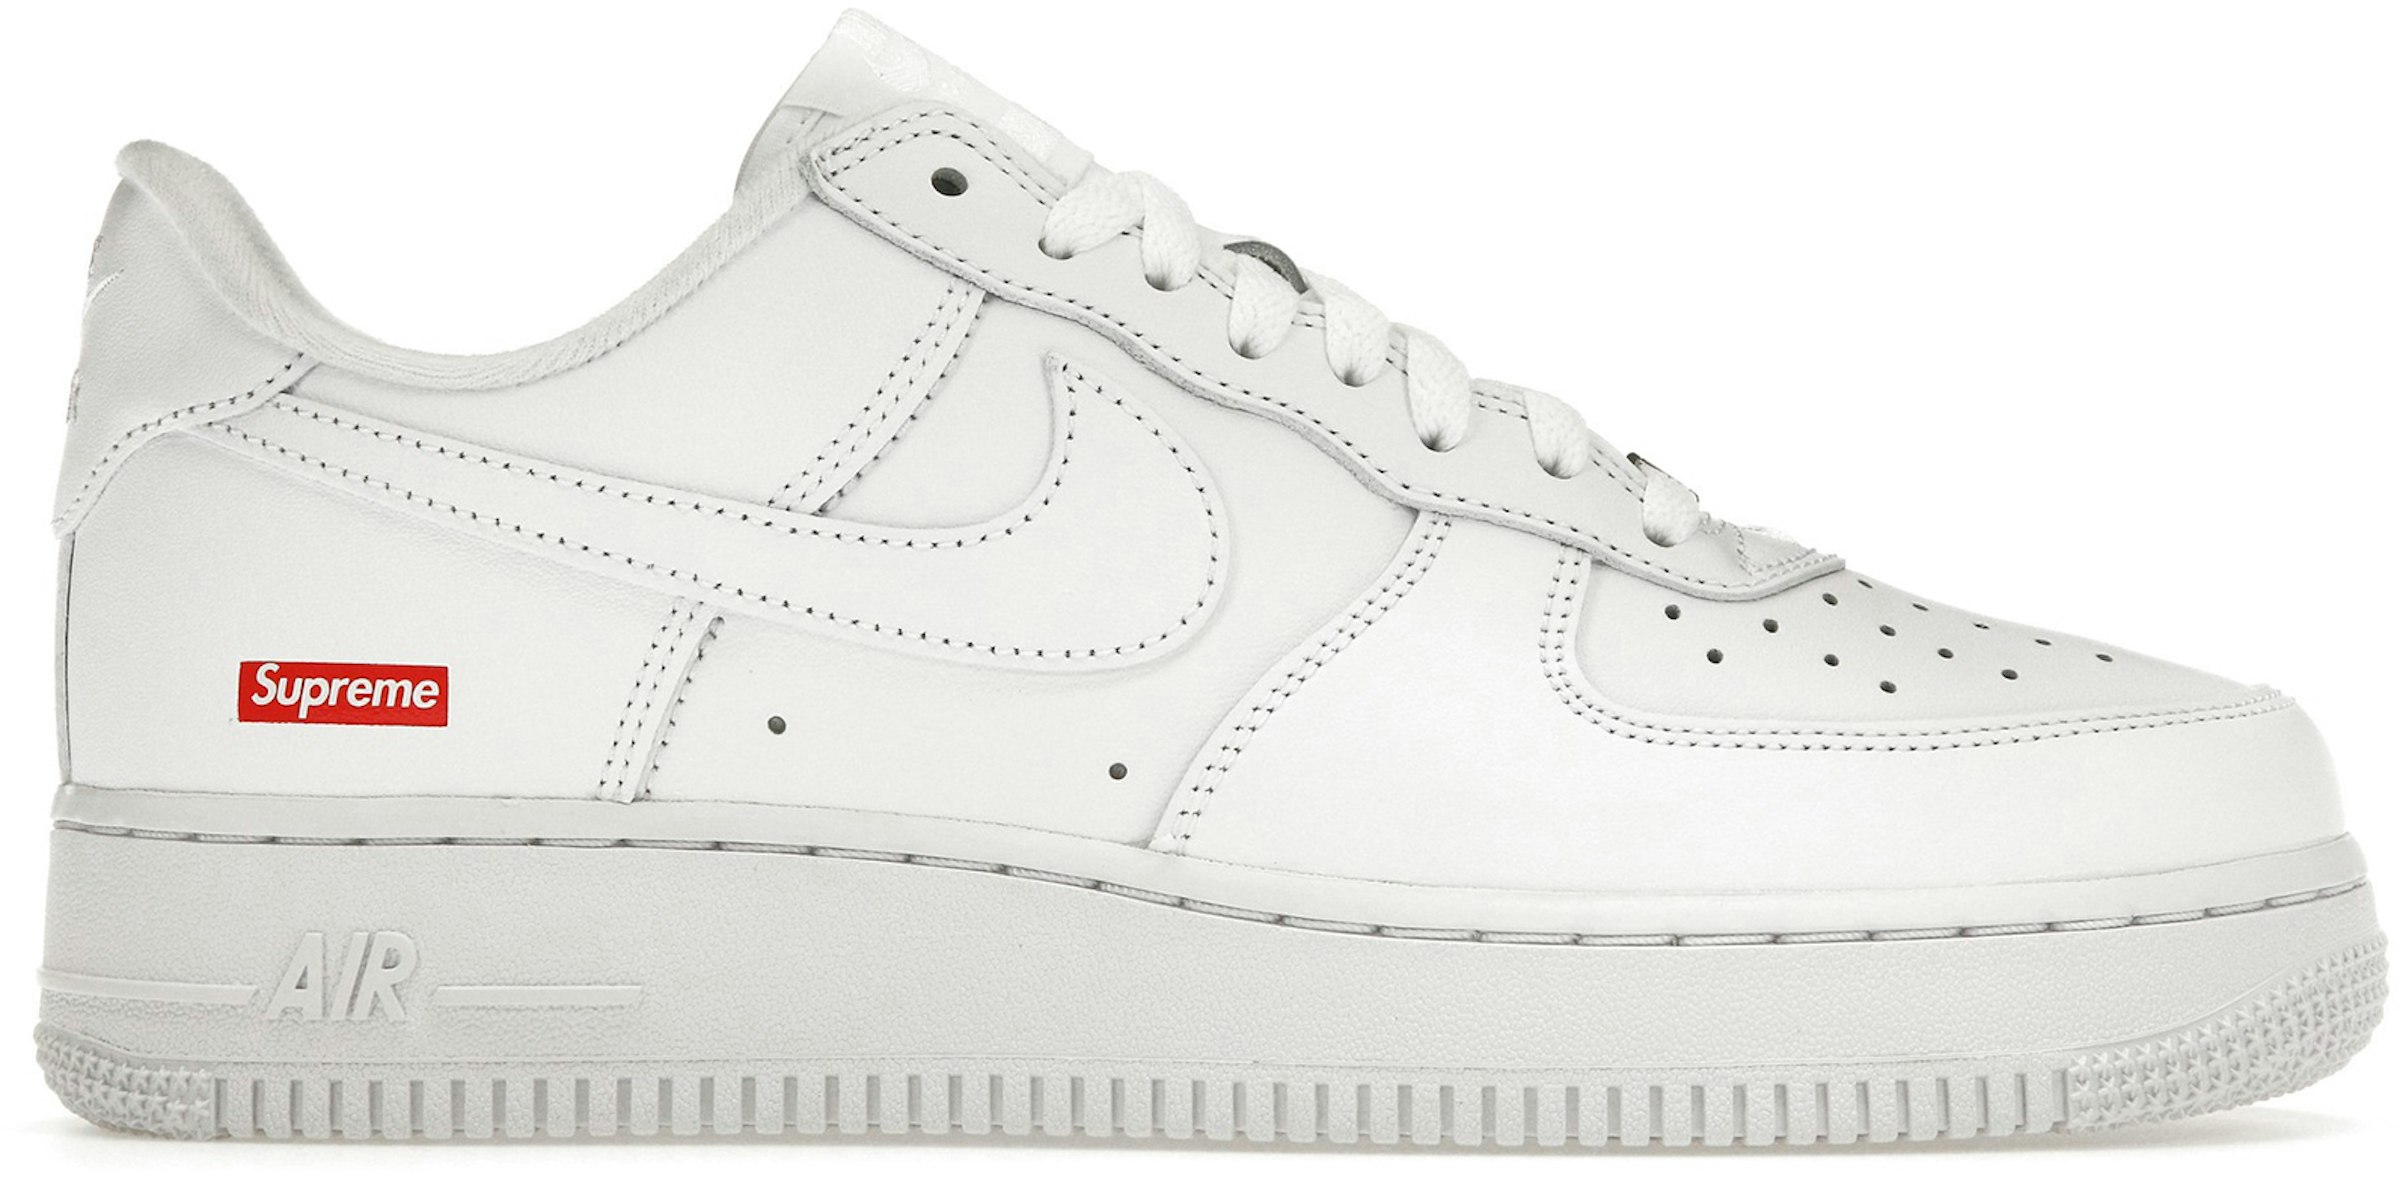 Nike Air Force 1 Low Hombre - CU9225-100 - US